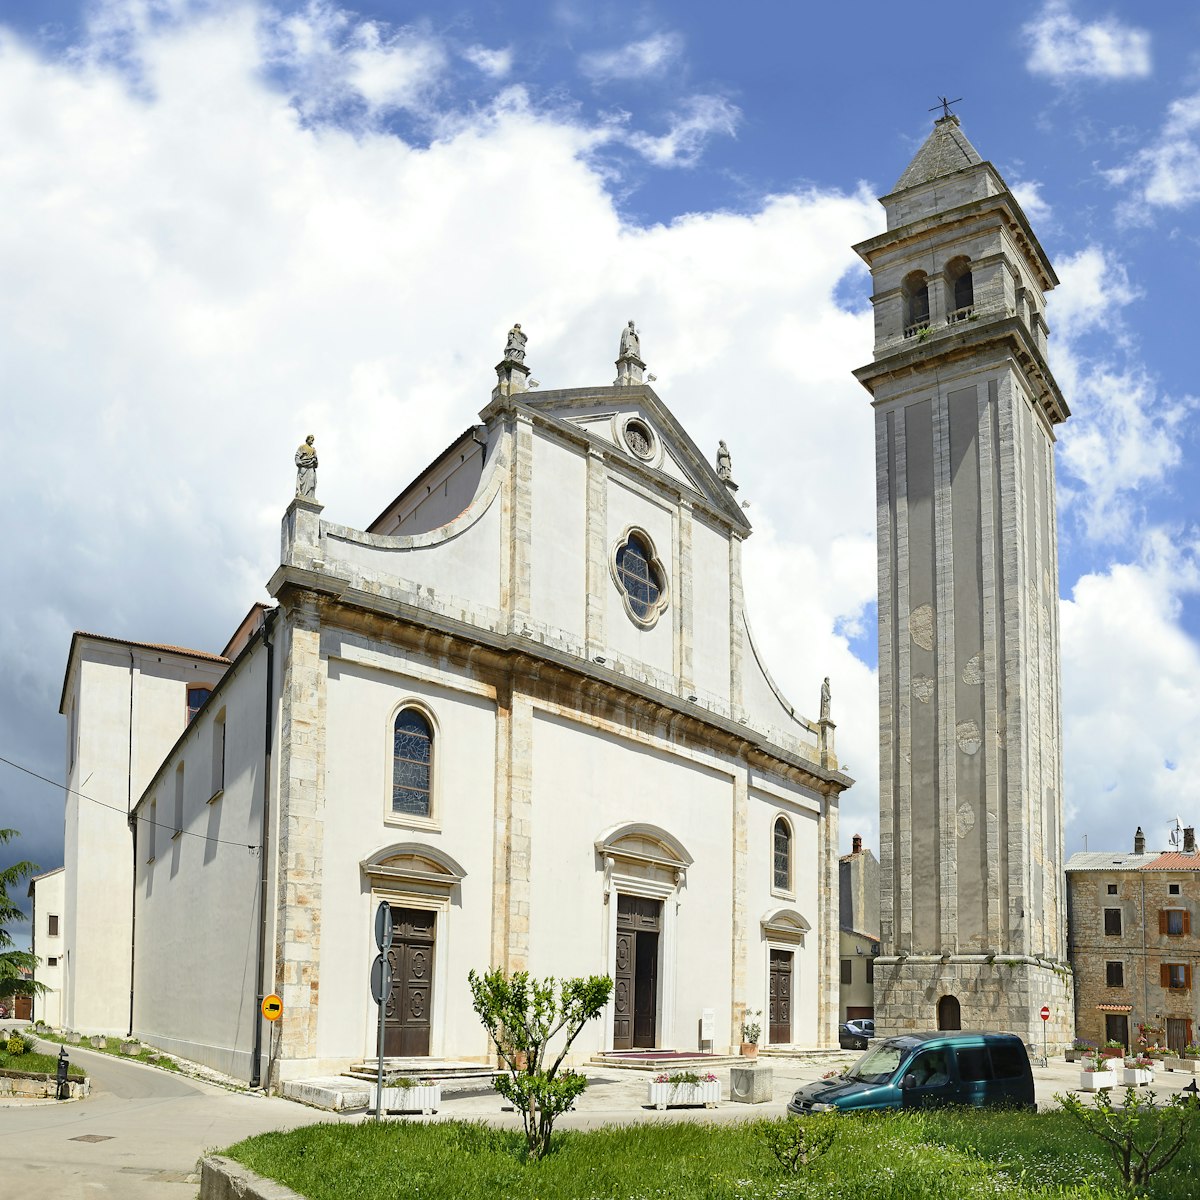 VODNJAN, CROATIA - MAY 8: Church of St. Blaise and bell tower on May 8, 2014. Vodnjan or Dignano is a old town in Istria County, situated 10 km north of Pula ; Shutterstock ID 193015502; Your name (First / Last): Anna Tyler; GL account no.: 65050; Netsuite department name: Online Editorial; Full Product or Project name including edition: destination-image-southern-europe